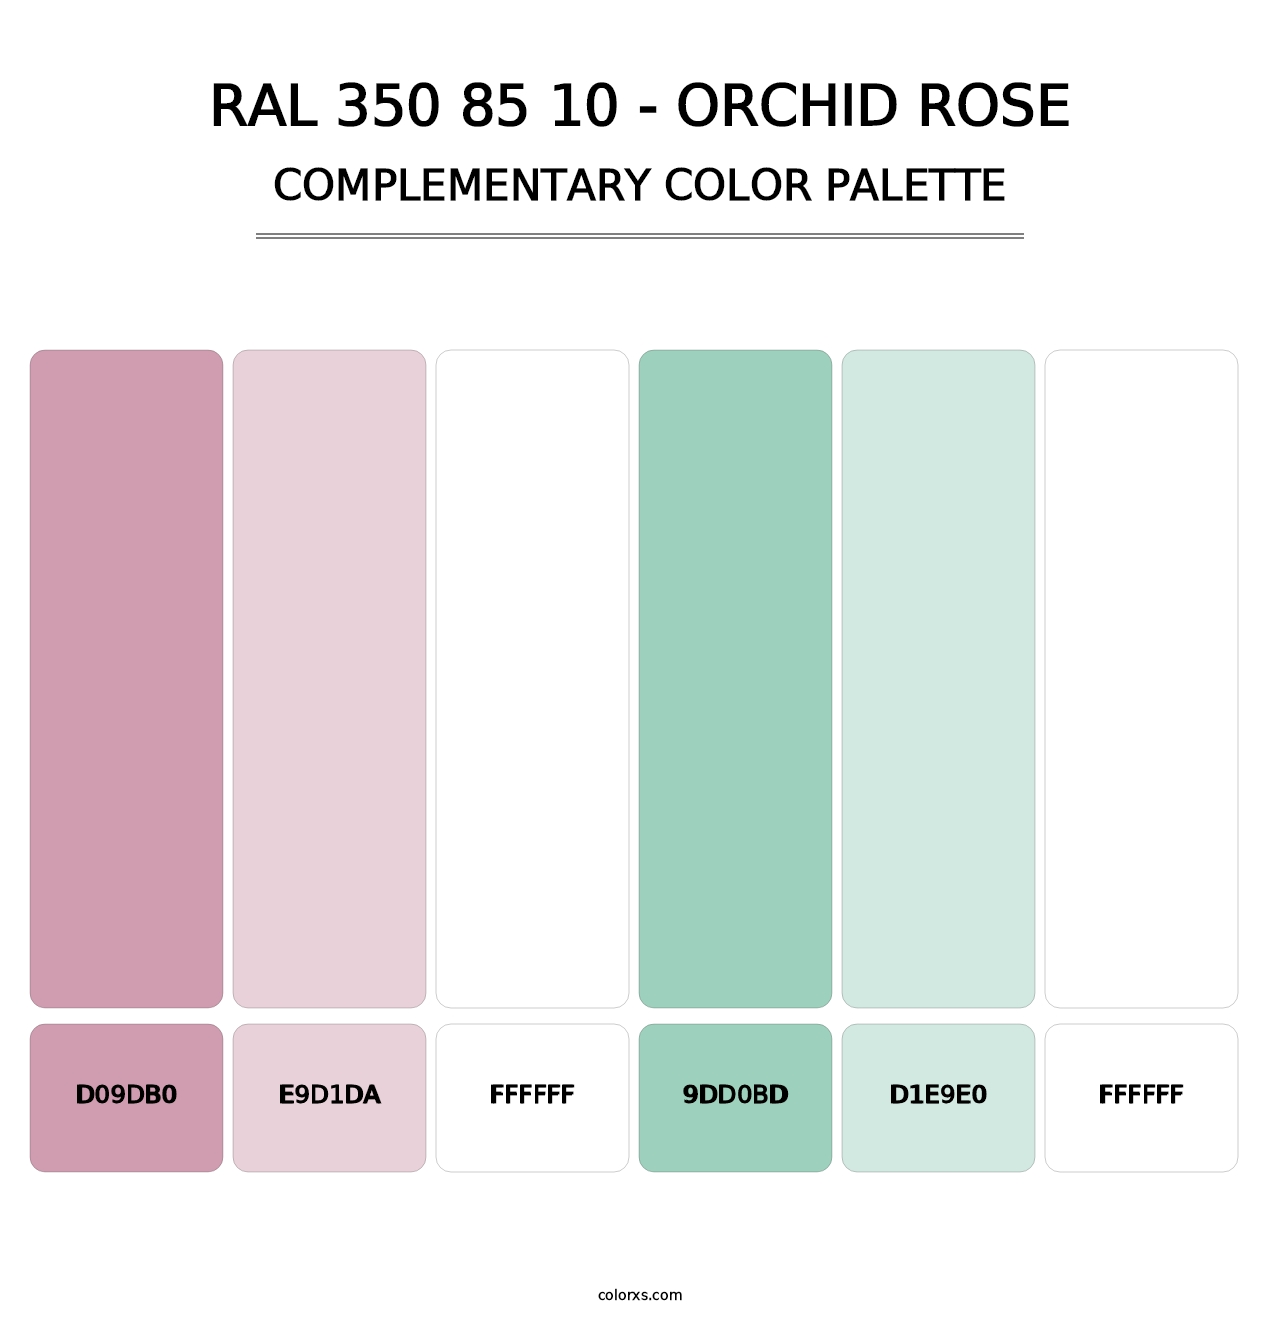 RAL 350 85 10 - Orchid Rose - Complementary Color Palette